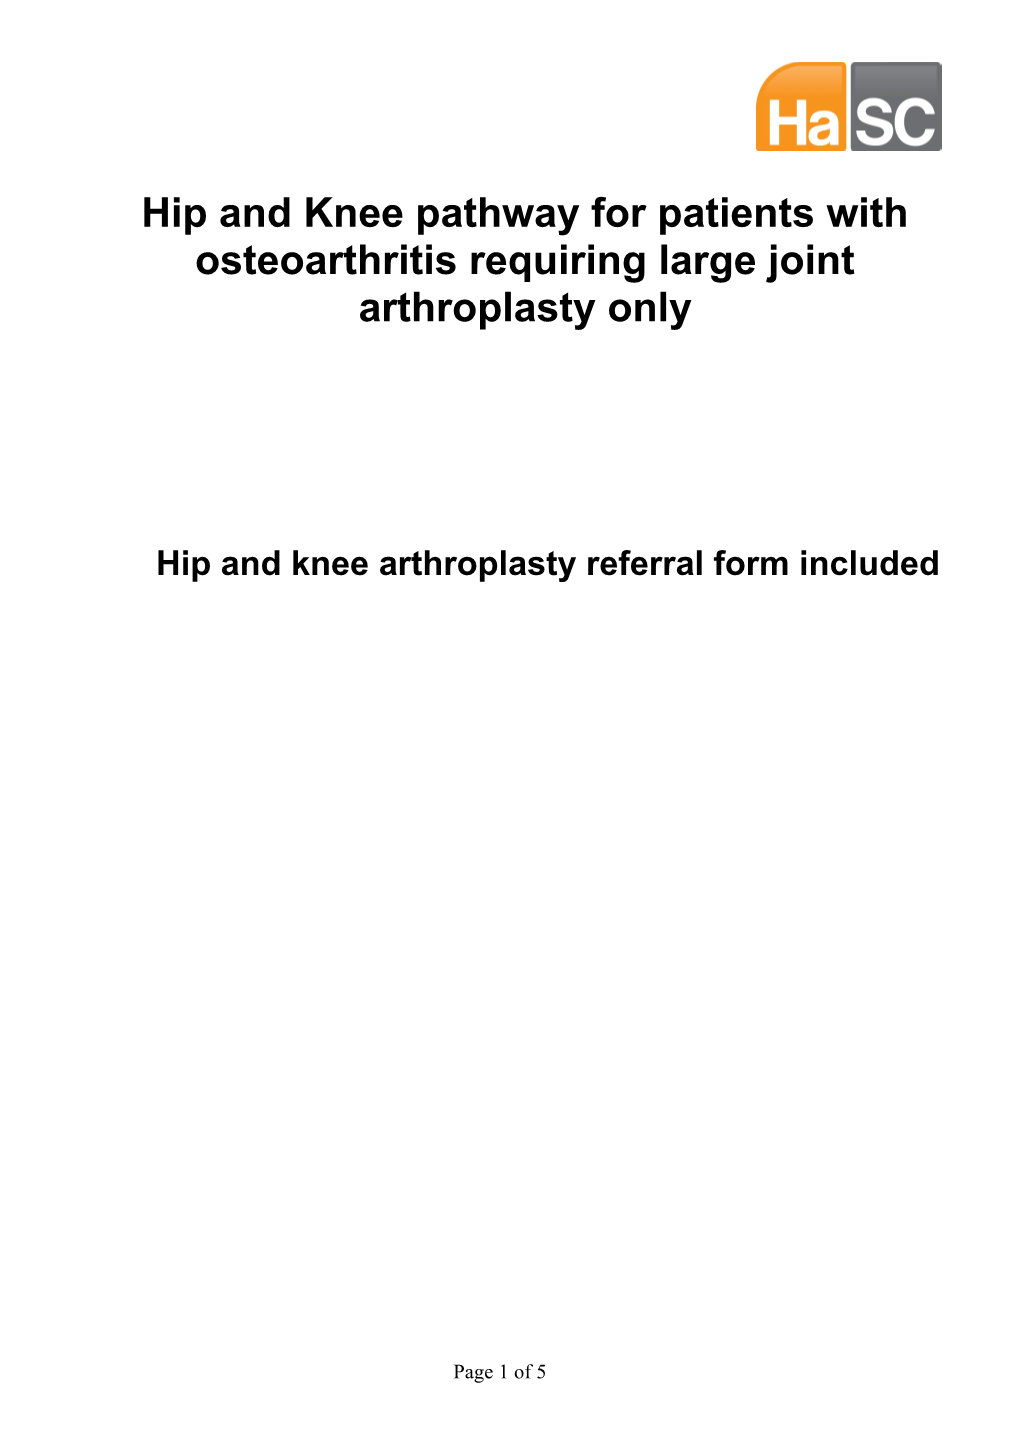 Hip and Knee Arthroplasty Referral Form Included